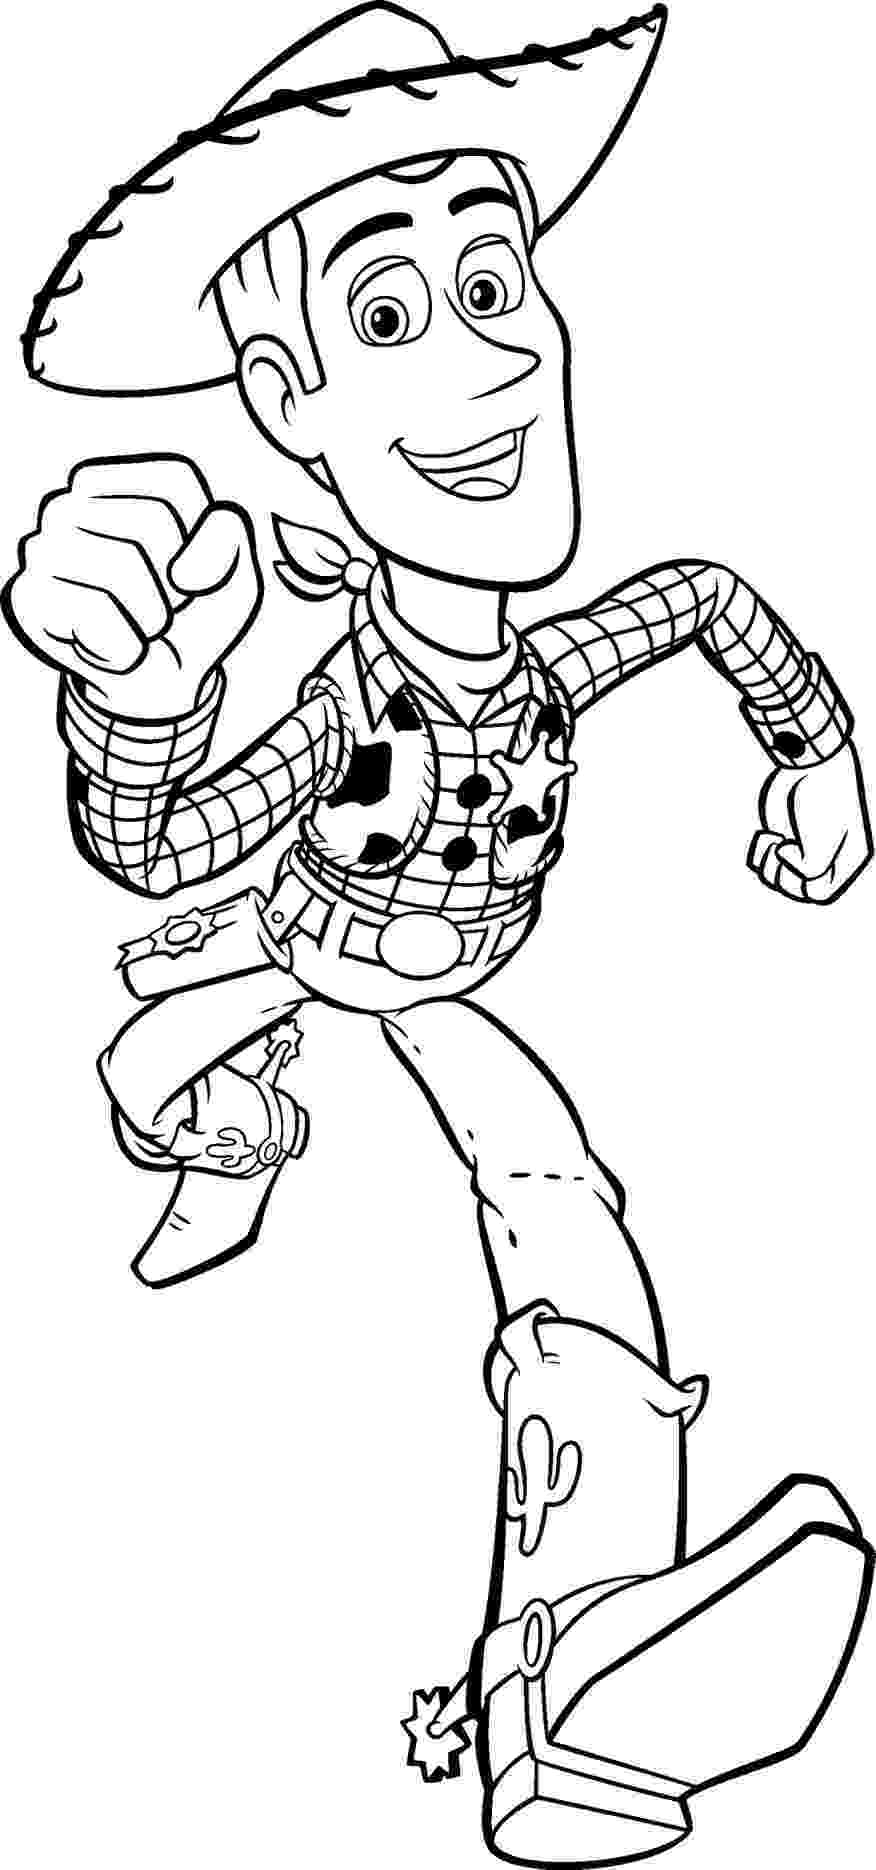 woody coloring sheet woody coloring pages to download and print for free woody coloring sheet 1 1